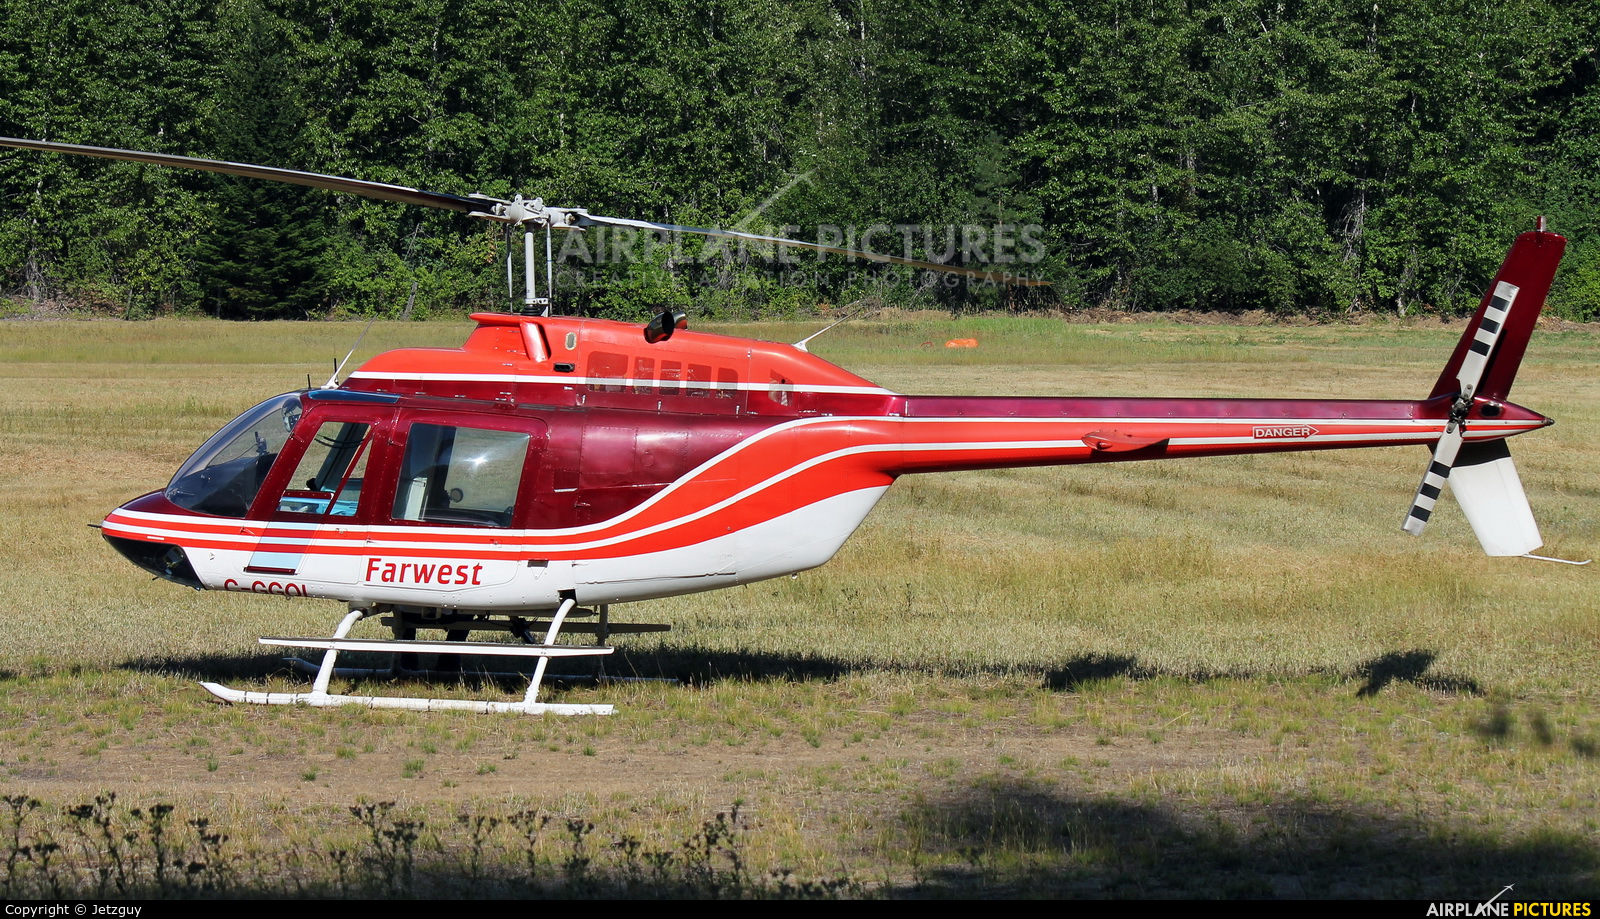 Farwest Helicopters C-GGQL aircraft at Off Airport - British Columbia